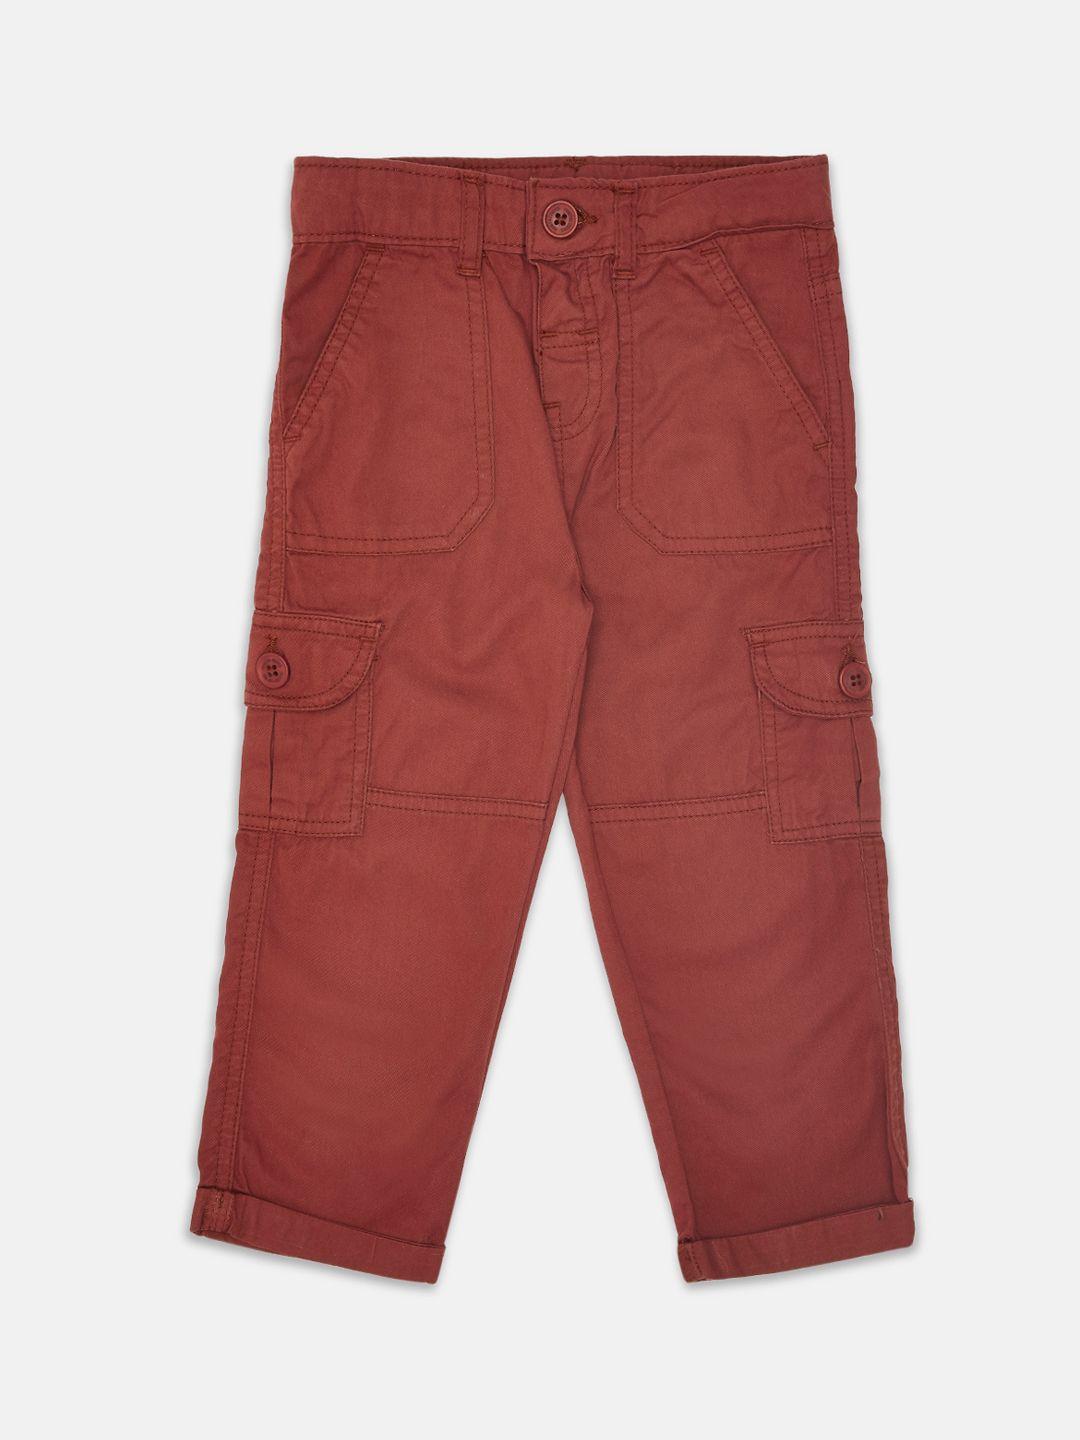 pantaloons-baby-boys-rust-red-cotton-cargos-trousers